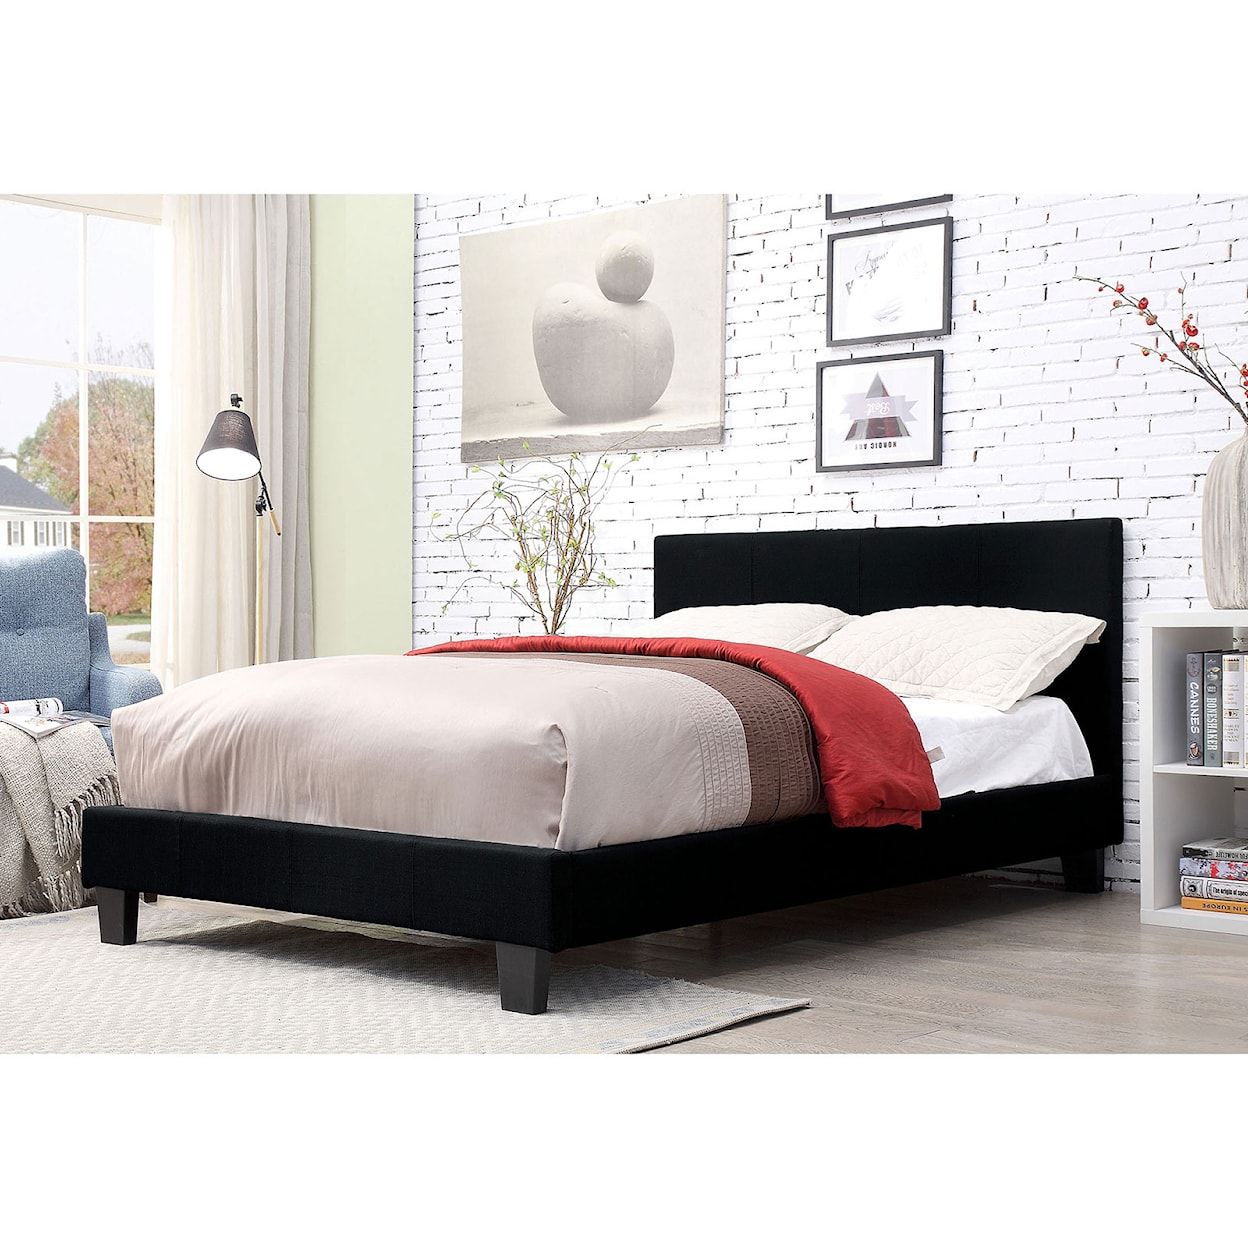 Furniture of America Sims King Bed